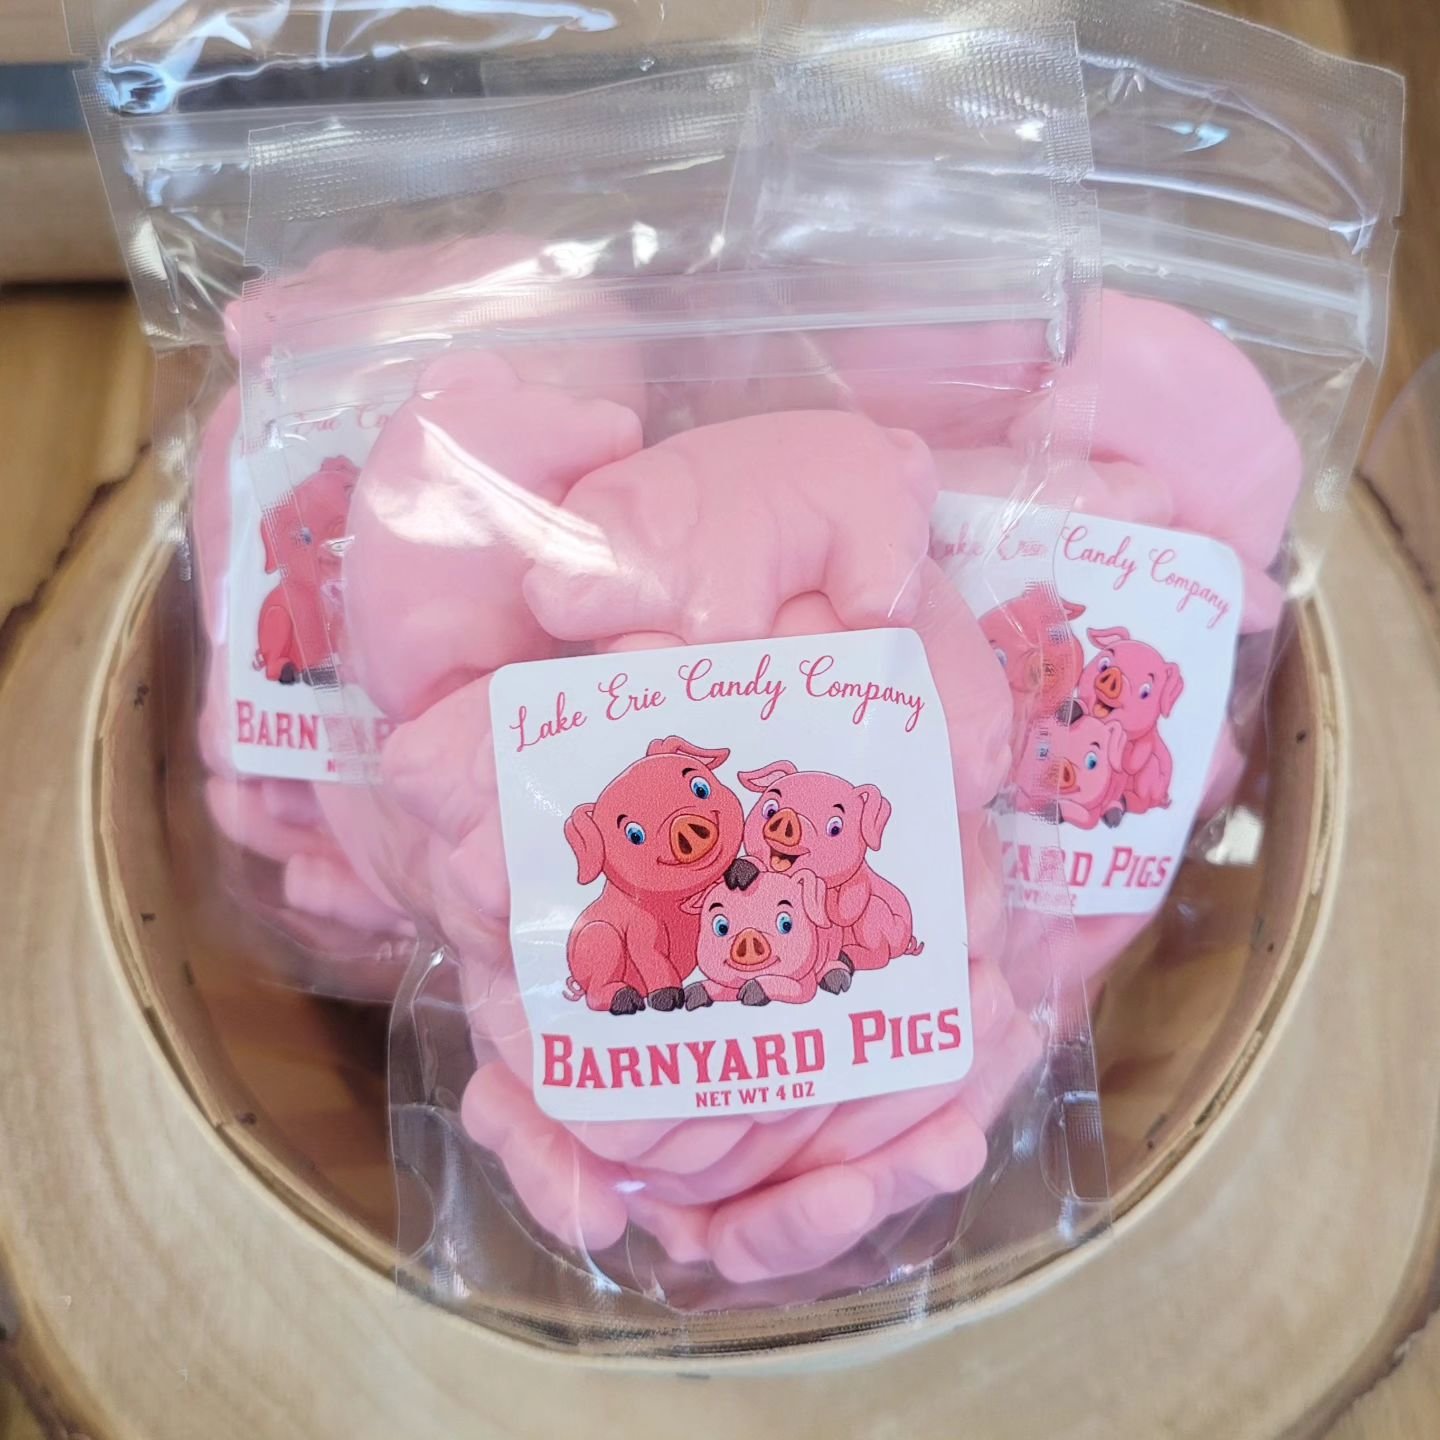 Today's employee candy pick of the day is from LeAnn! LeAnn is a candy packer during the week and also works the cash register on Saturdays. Her favorite candy is Barnyard Pigs! She said &quot;The raspberry smell and taste is amazing!&quot; along wit